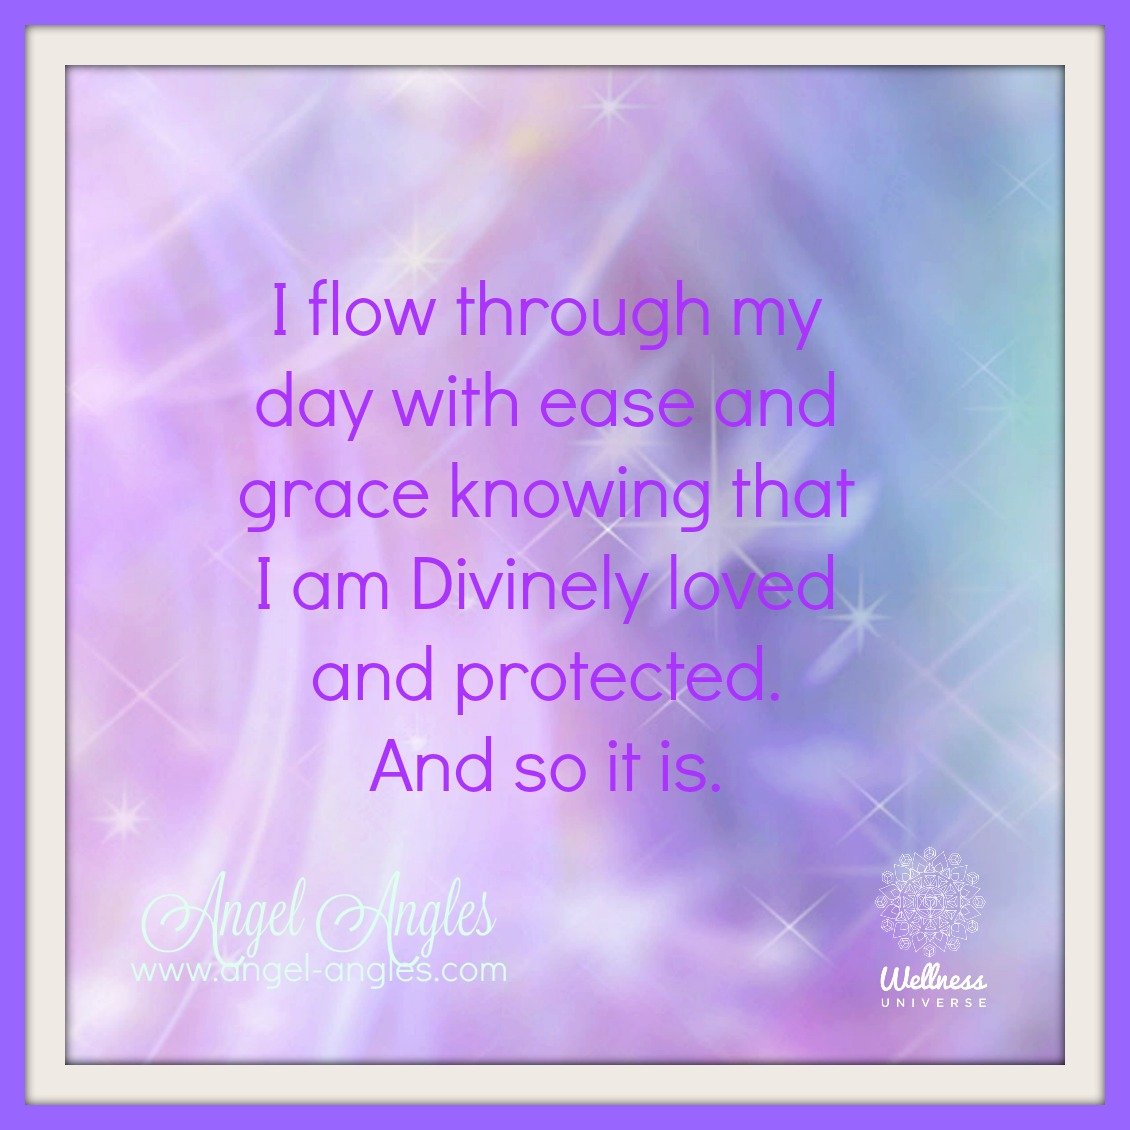 A wonderful intention for my day. Will you be joining me with ease and grace guiding our every move? 

I flow through my day with ease and grace knowing that I am Divinely loved, supported, and protected every step of the way today. Amen, and so it i